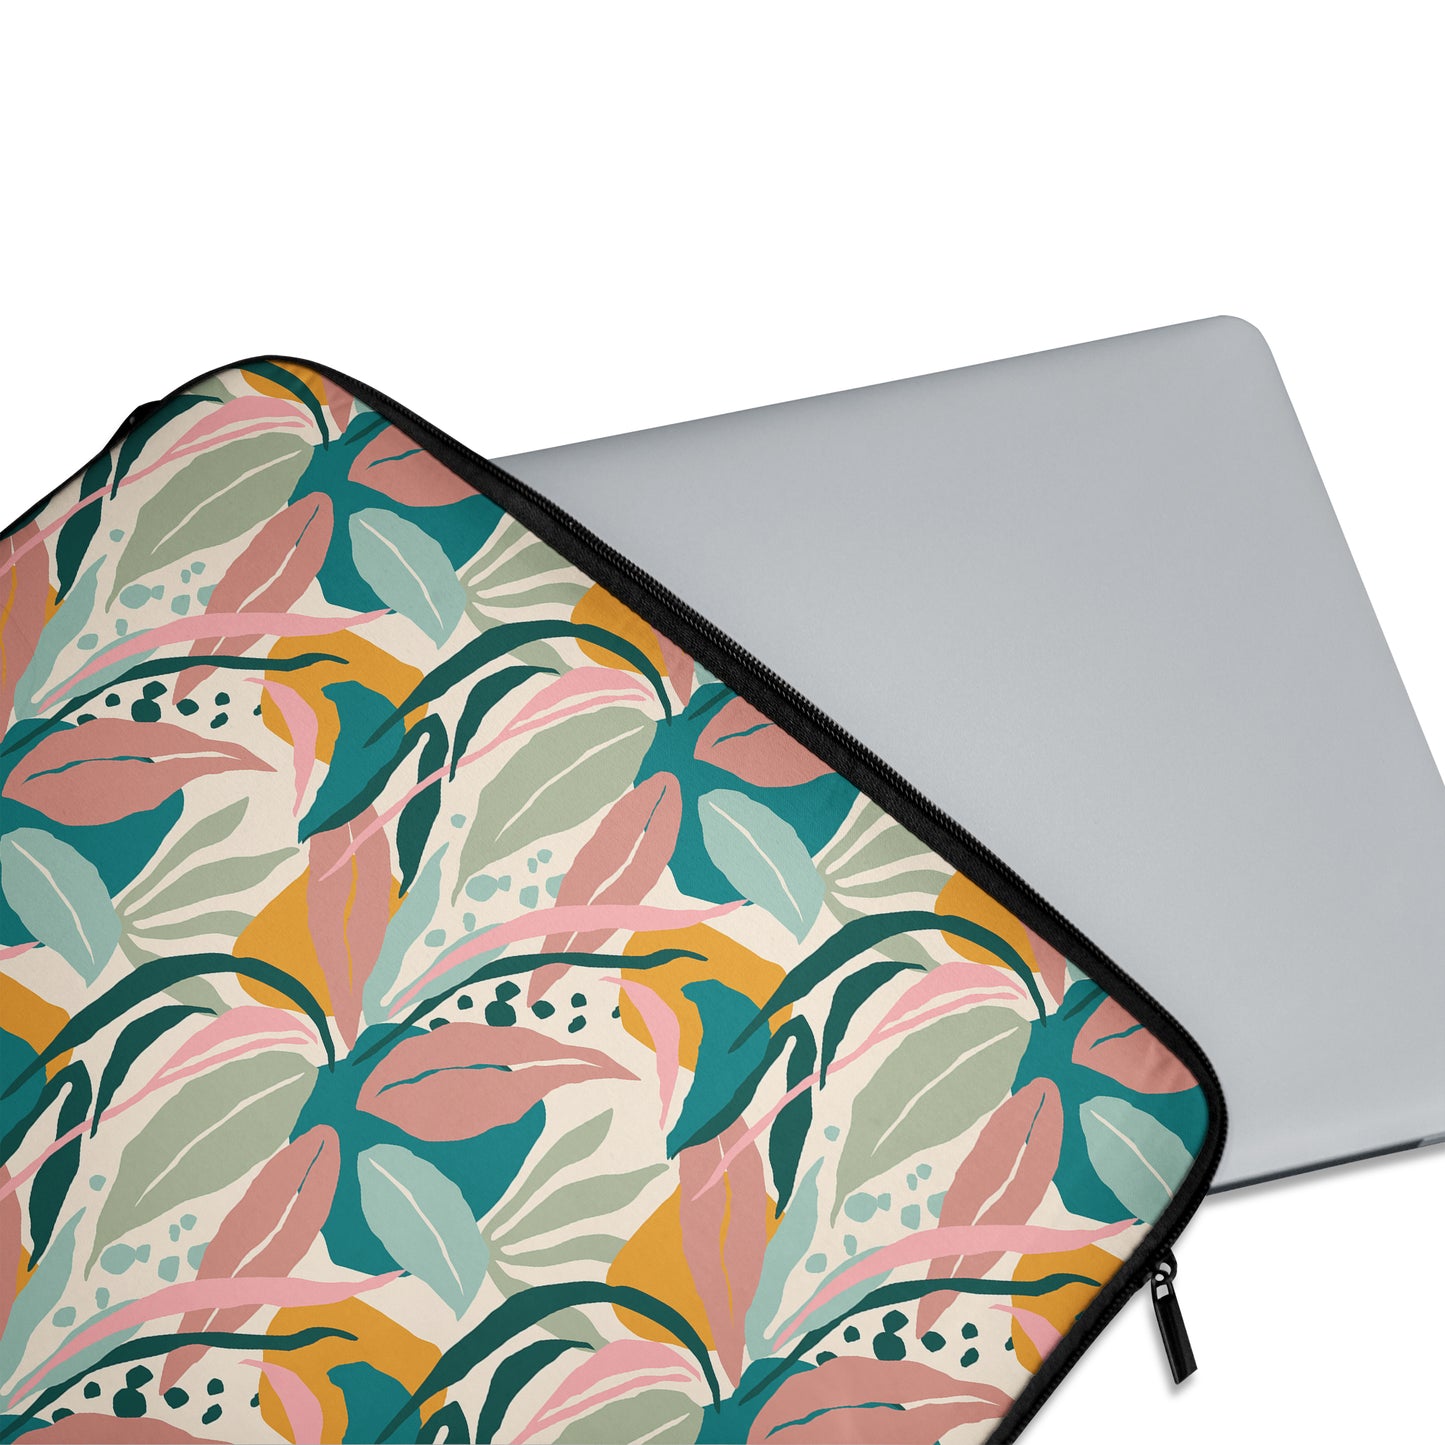 COLORFUL LAPTOP SLEEVE